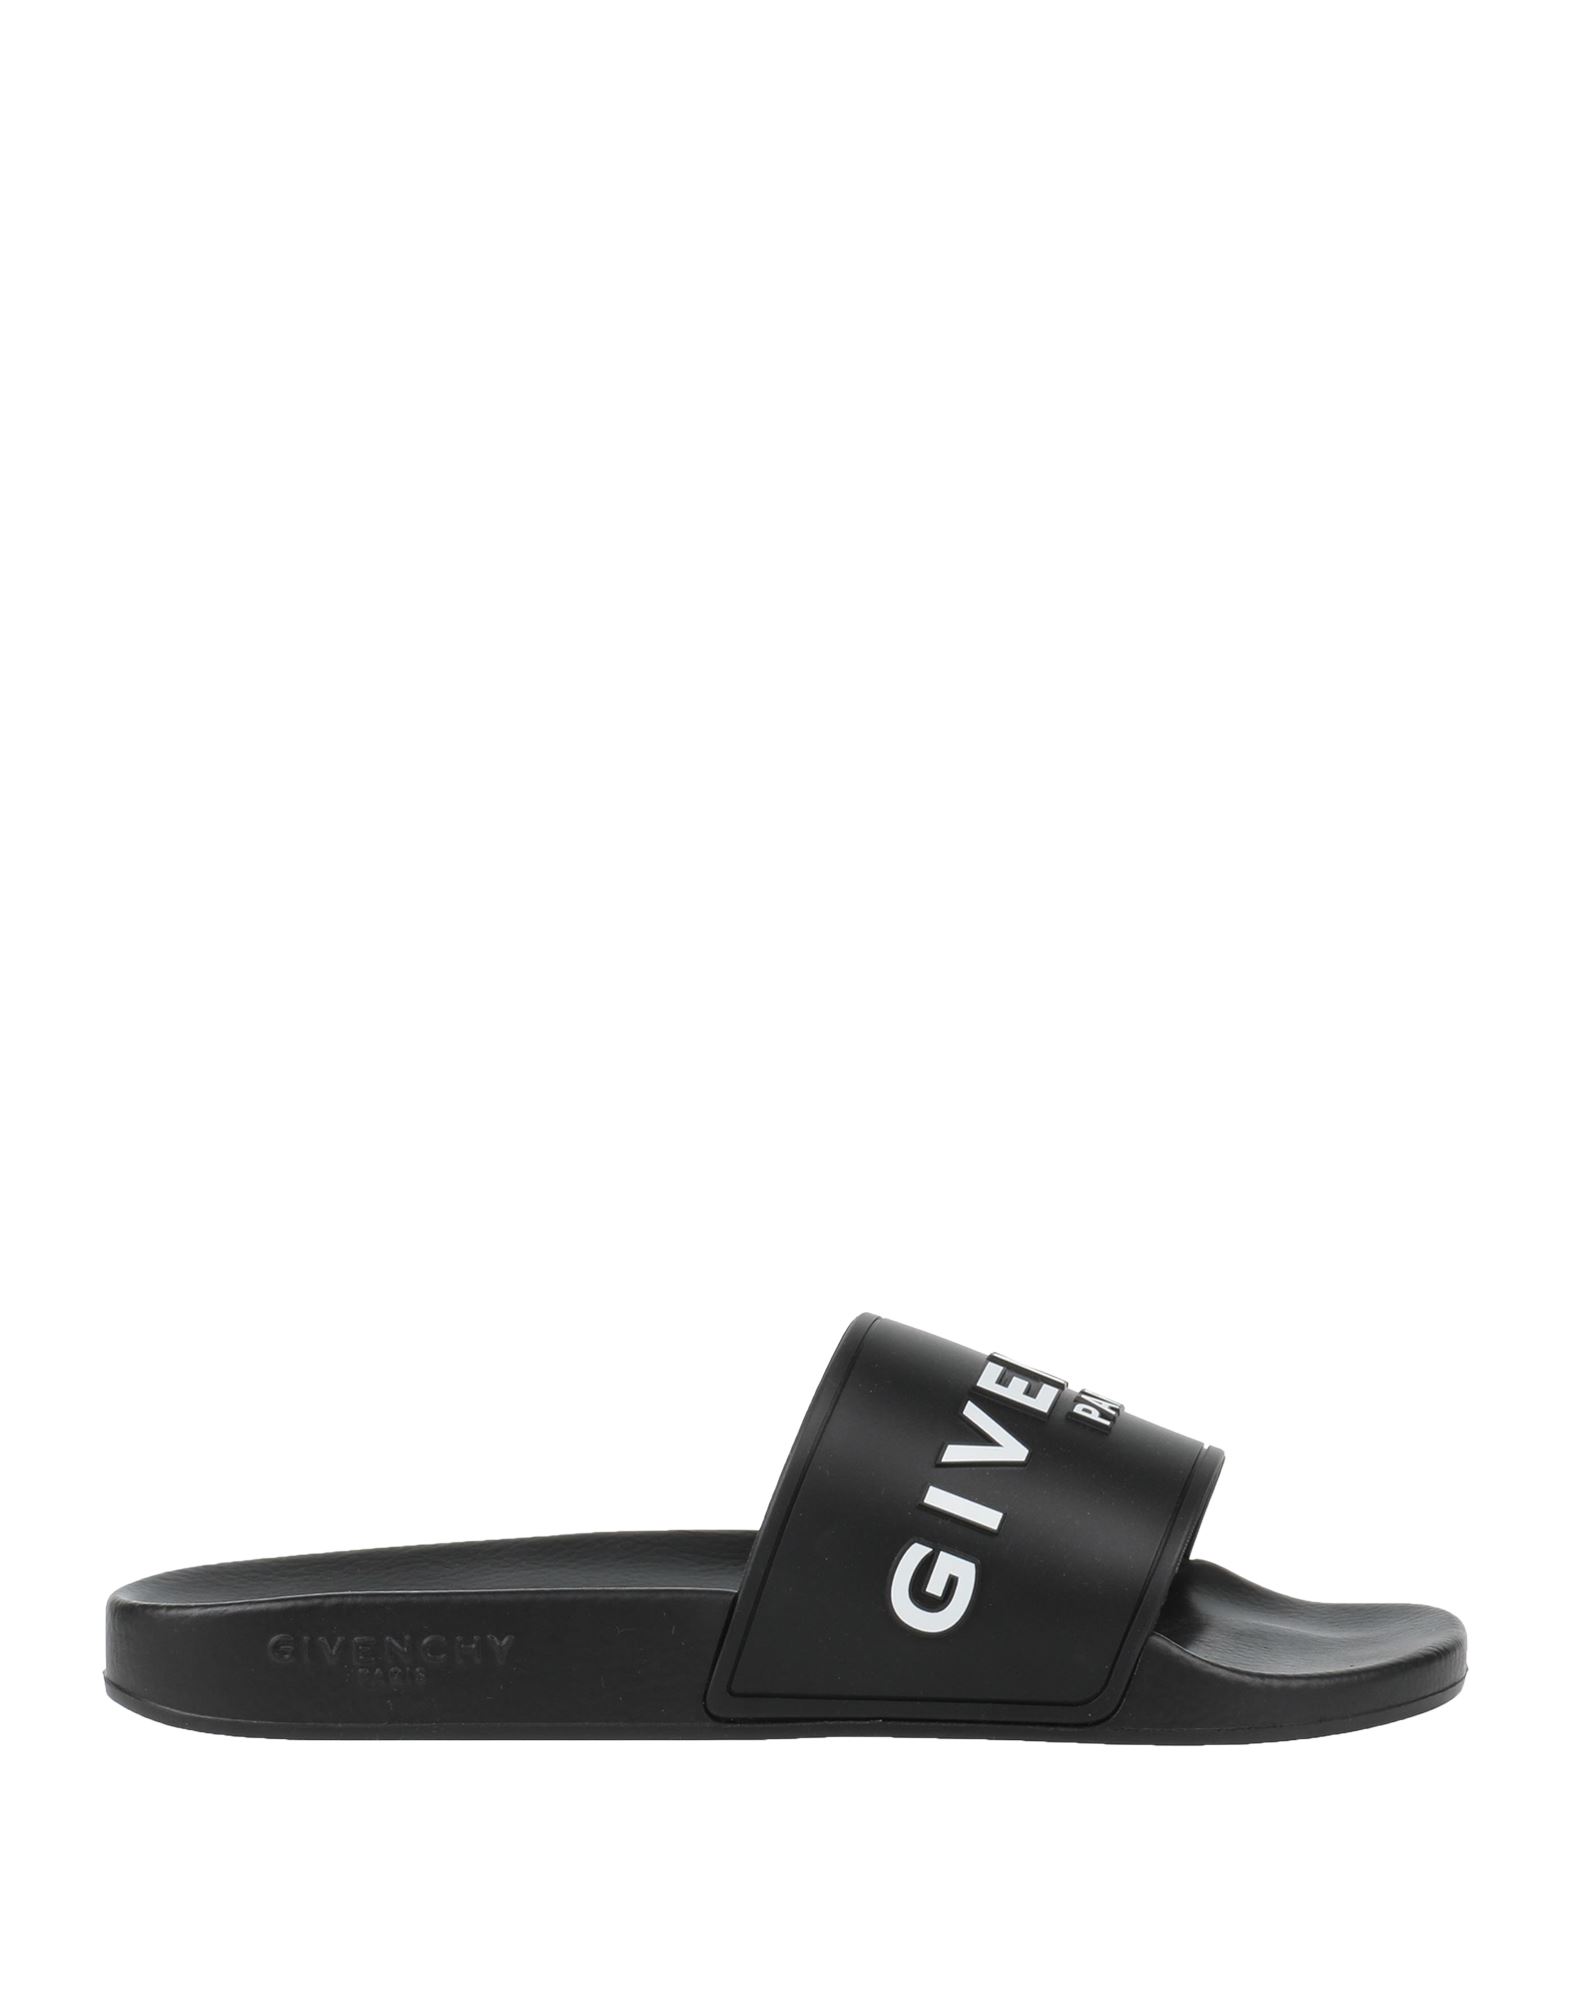 GIVENCHY GIVENCHY MAN SANDALS BLACK SIZE 12 RUBBER,11915920SK 5